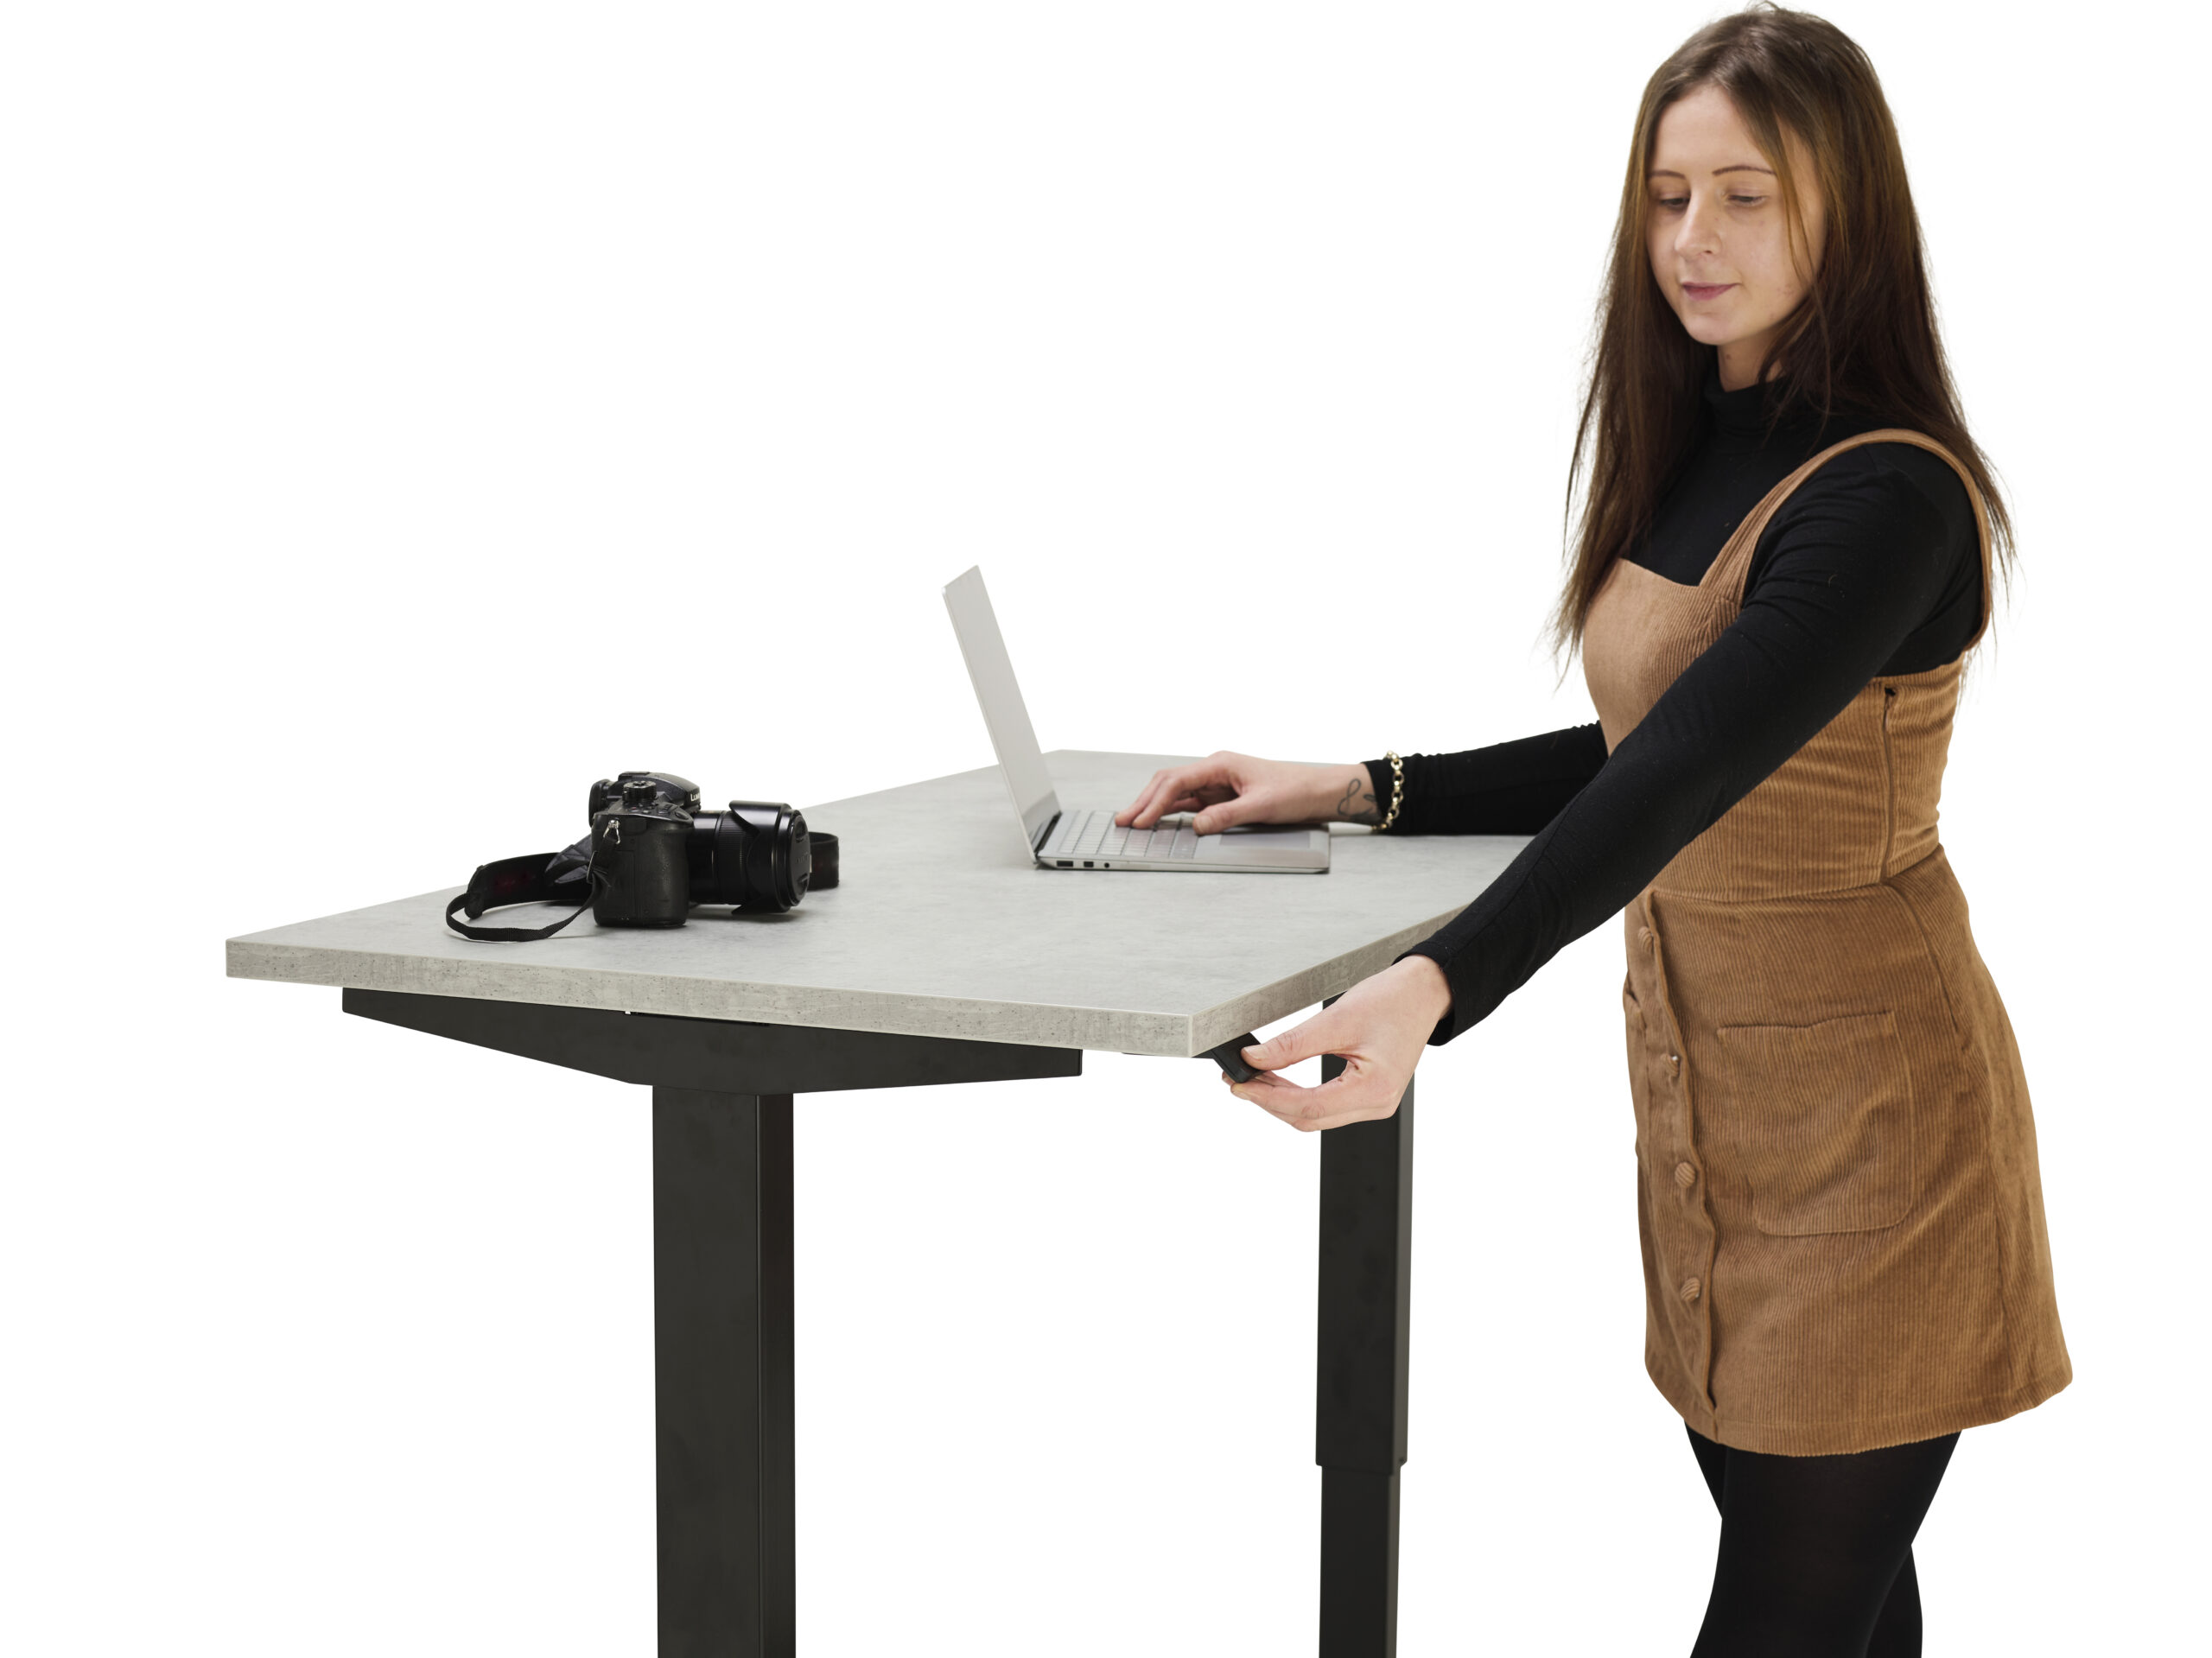 Using a height adjustable standing desk